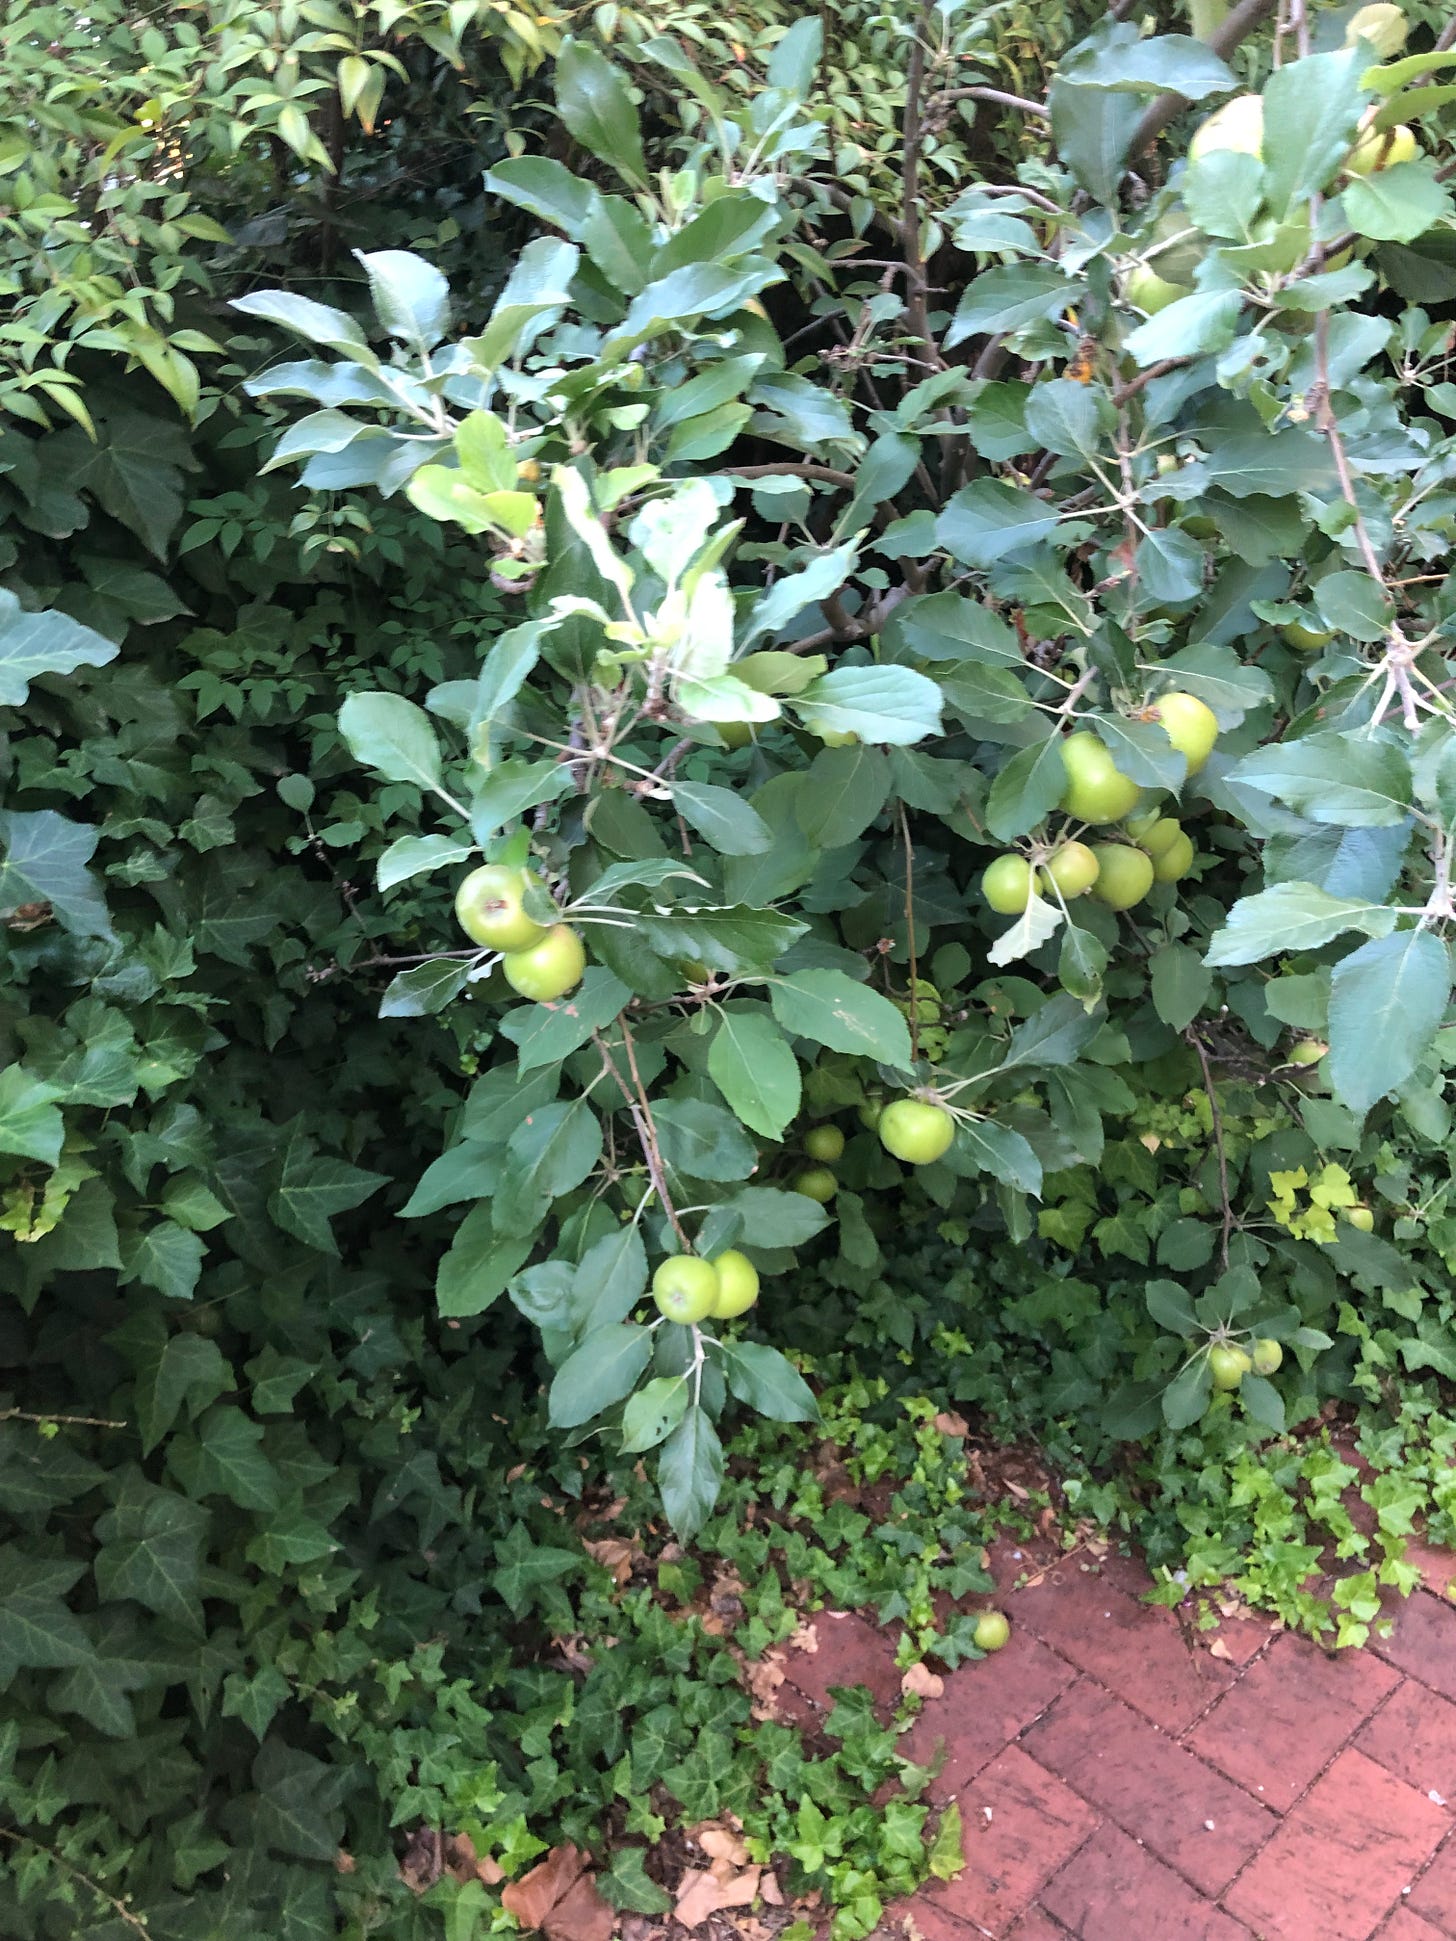 Crunchy apples.  Coming soon to our front yard.